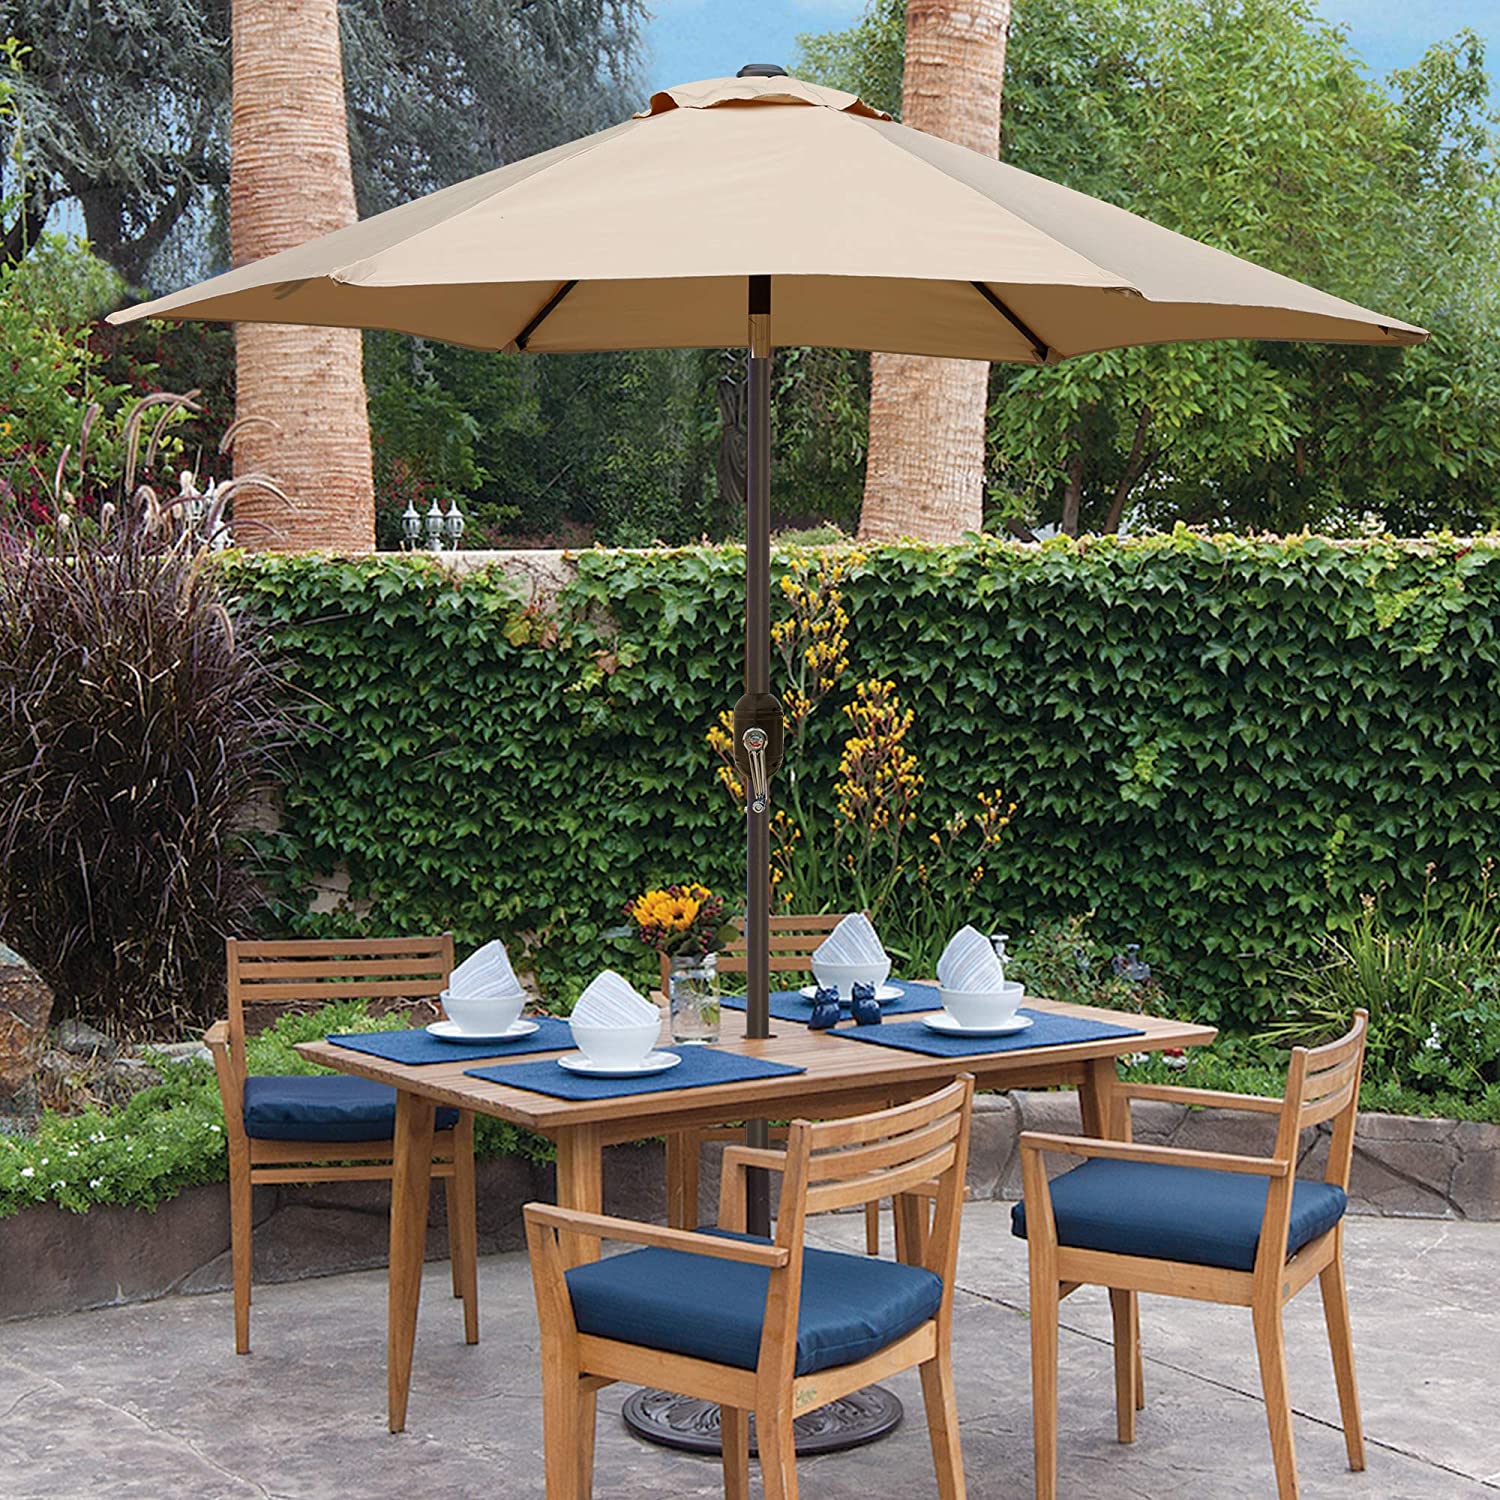 7.5 ft. Market Outdoor Patio Umbrella with Push Button Tilt and Crank in Tan